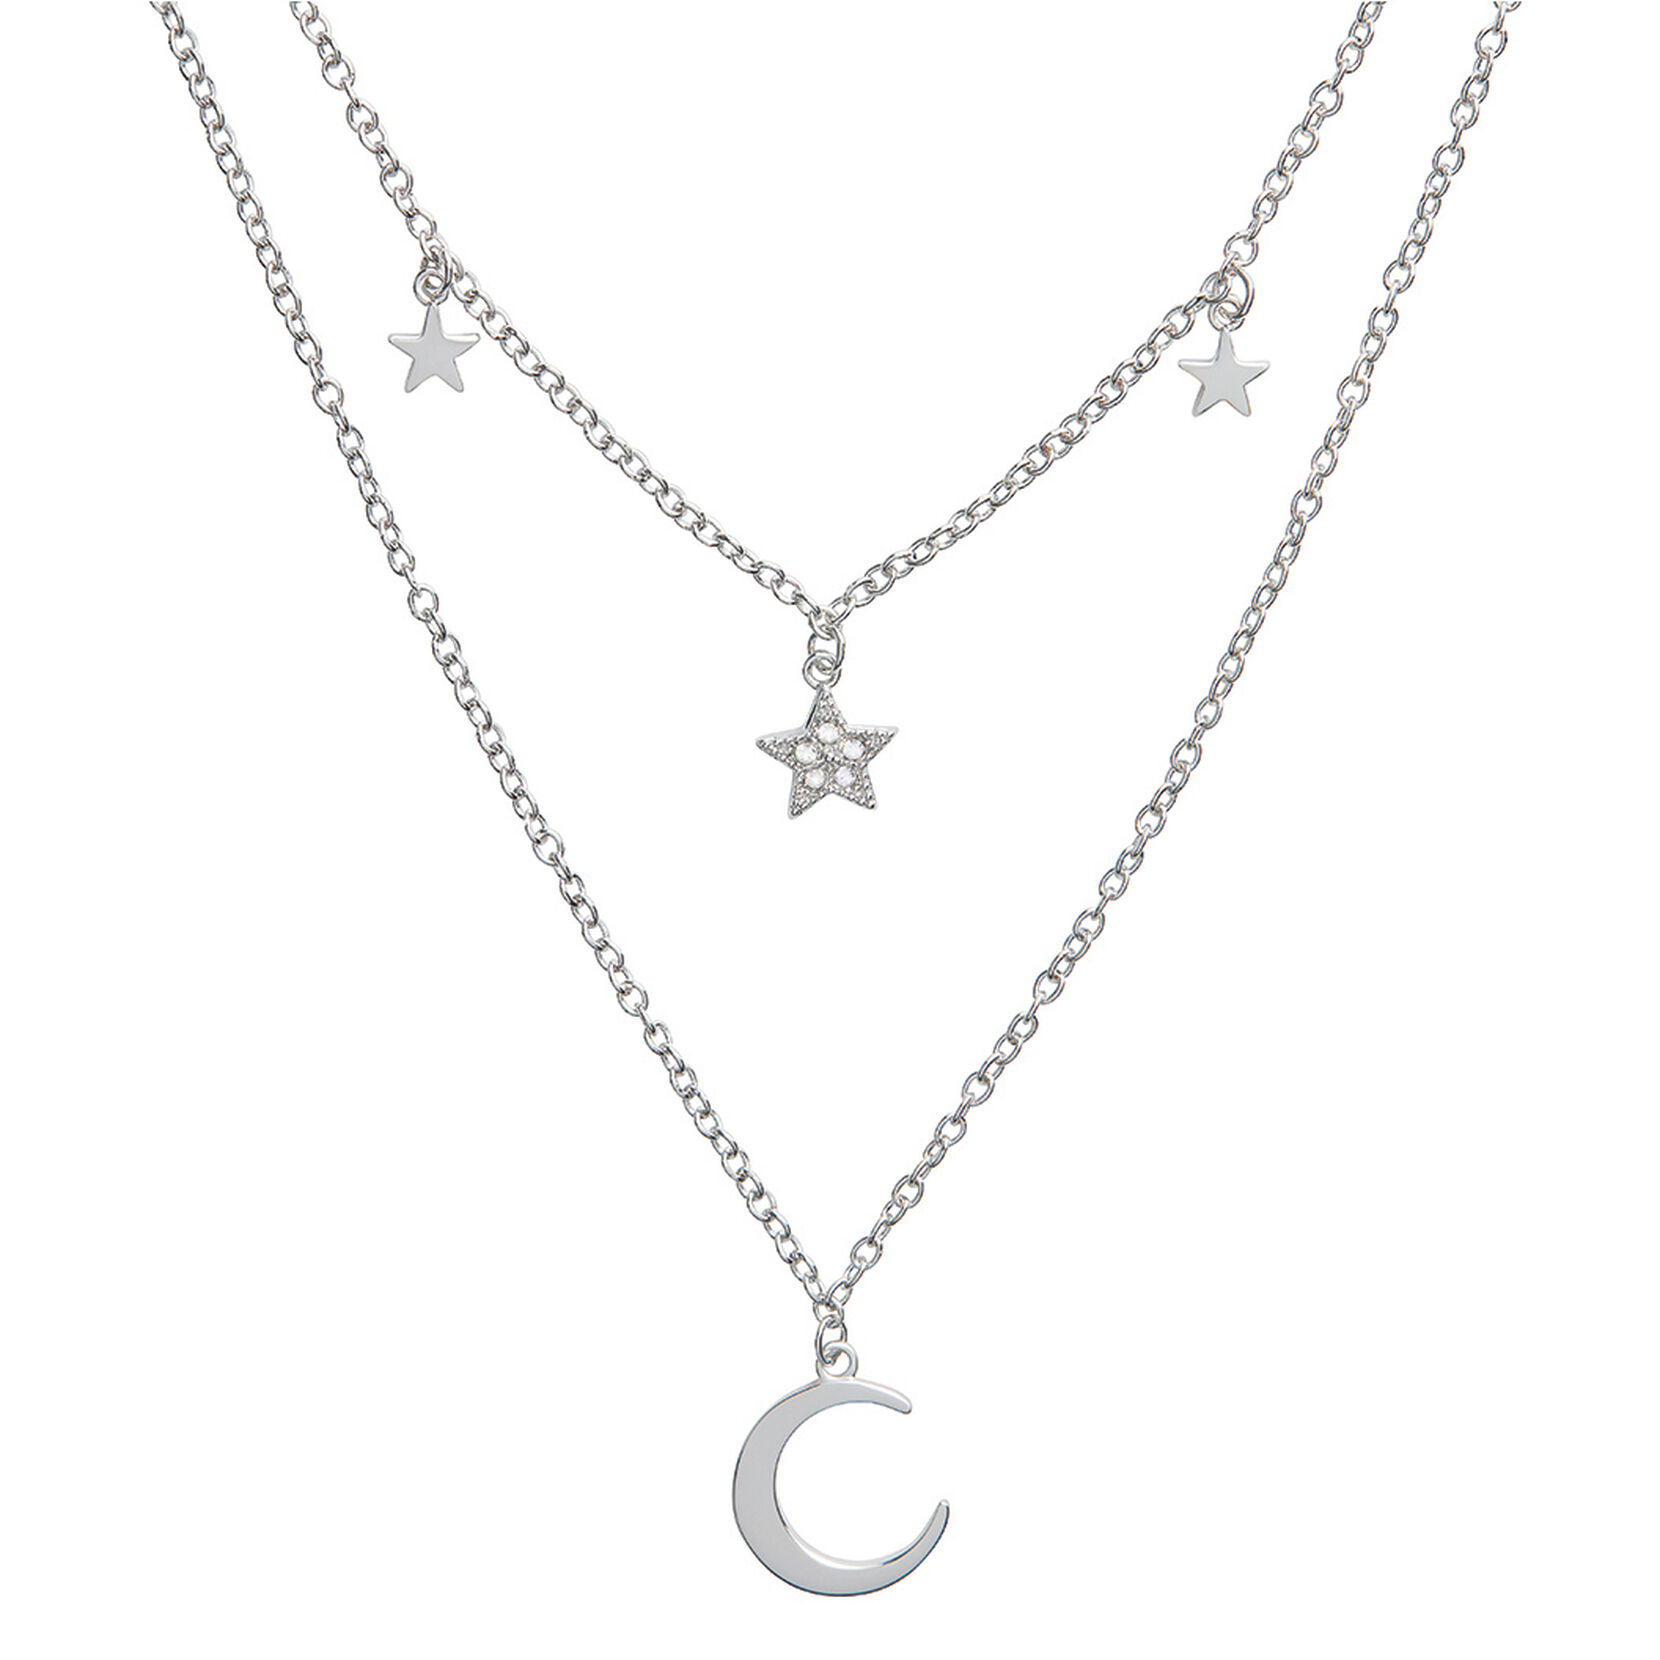 Celestial Silver Moon & Star Double Chain Necklace